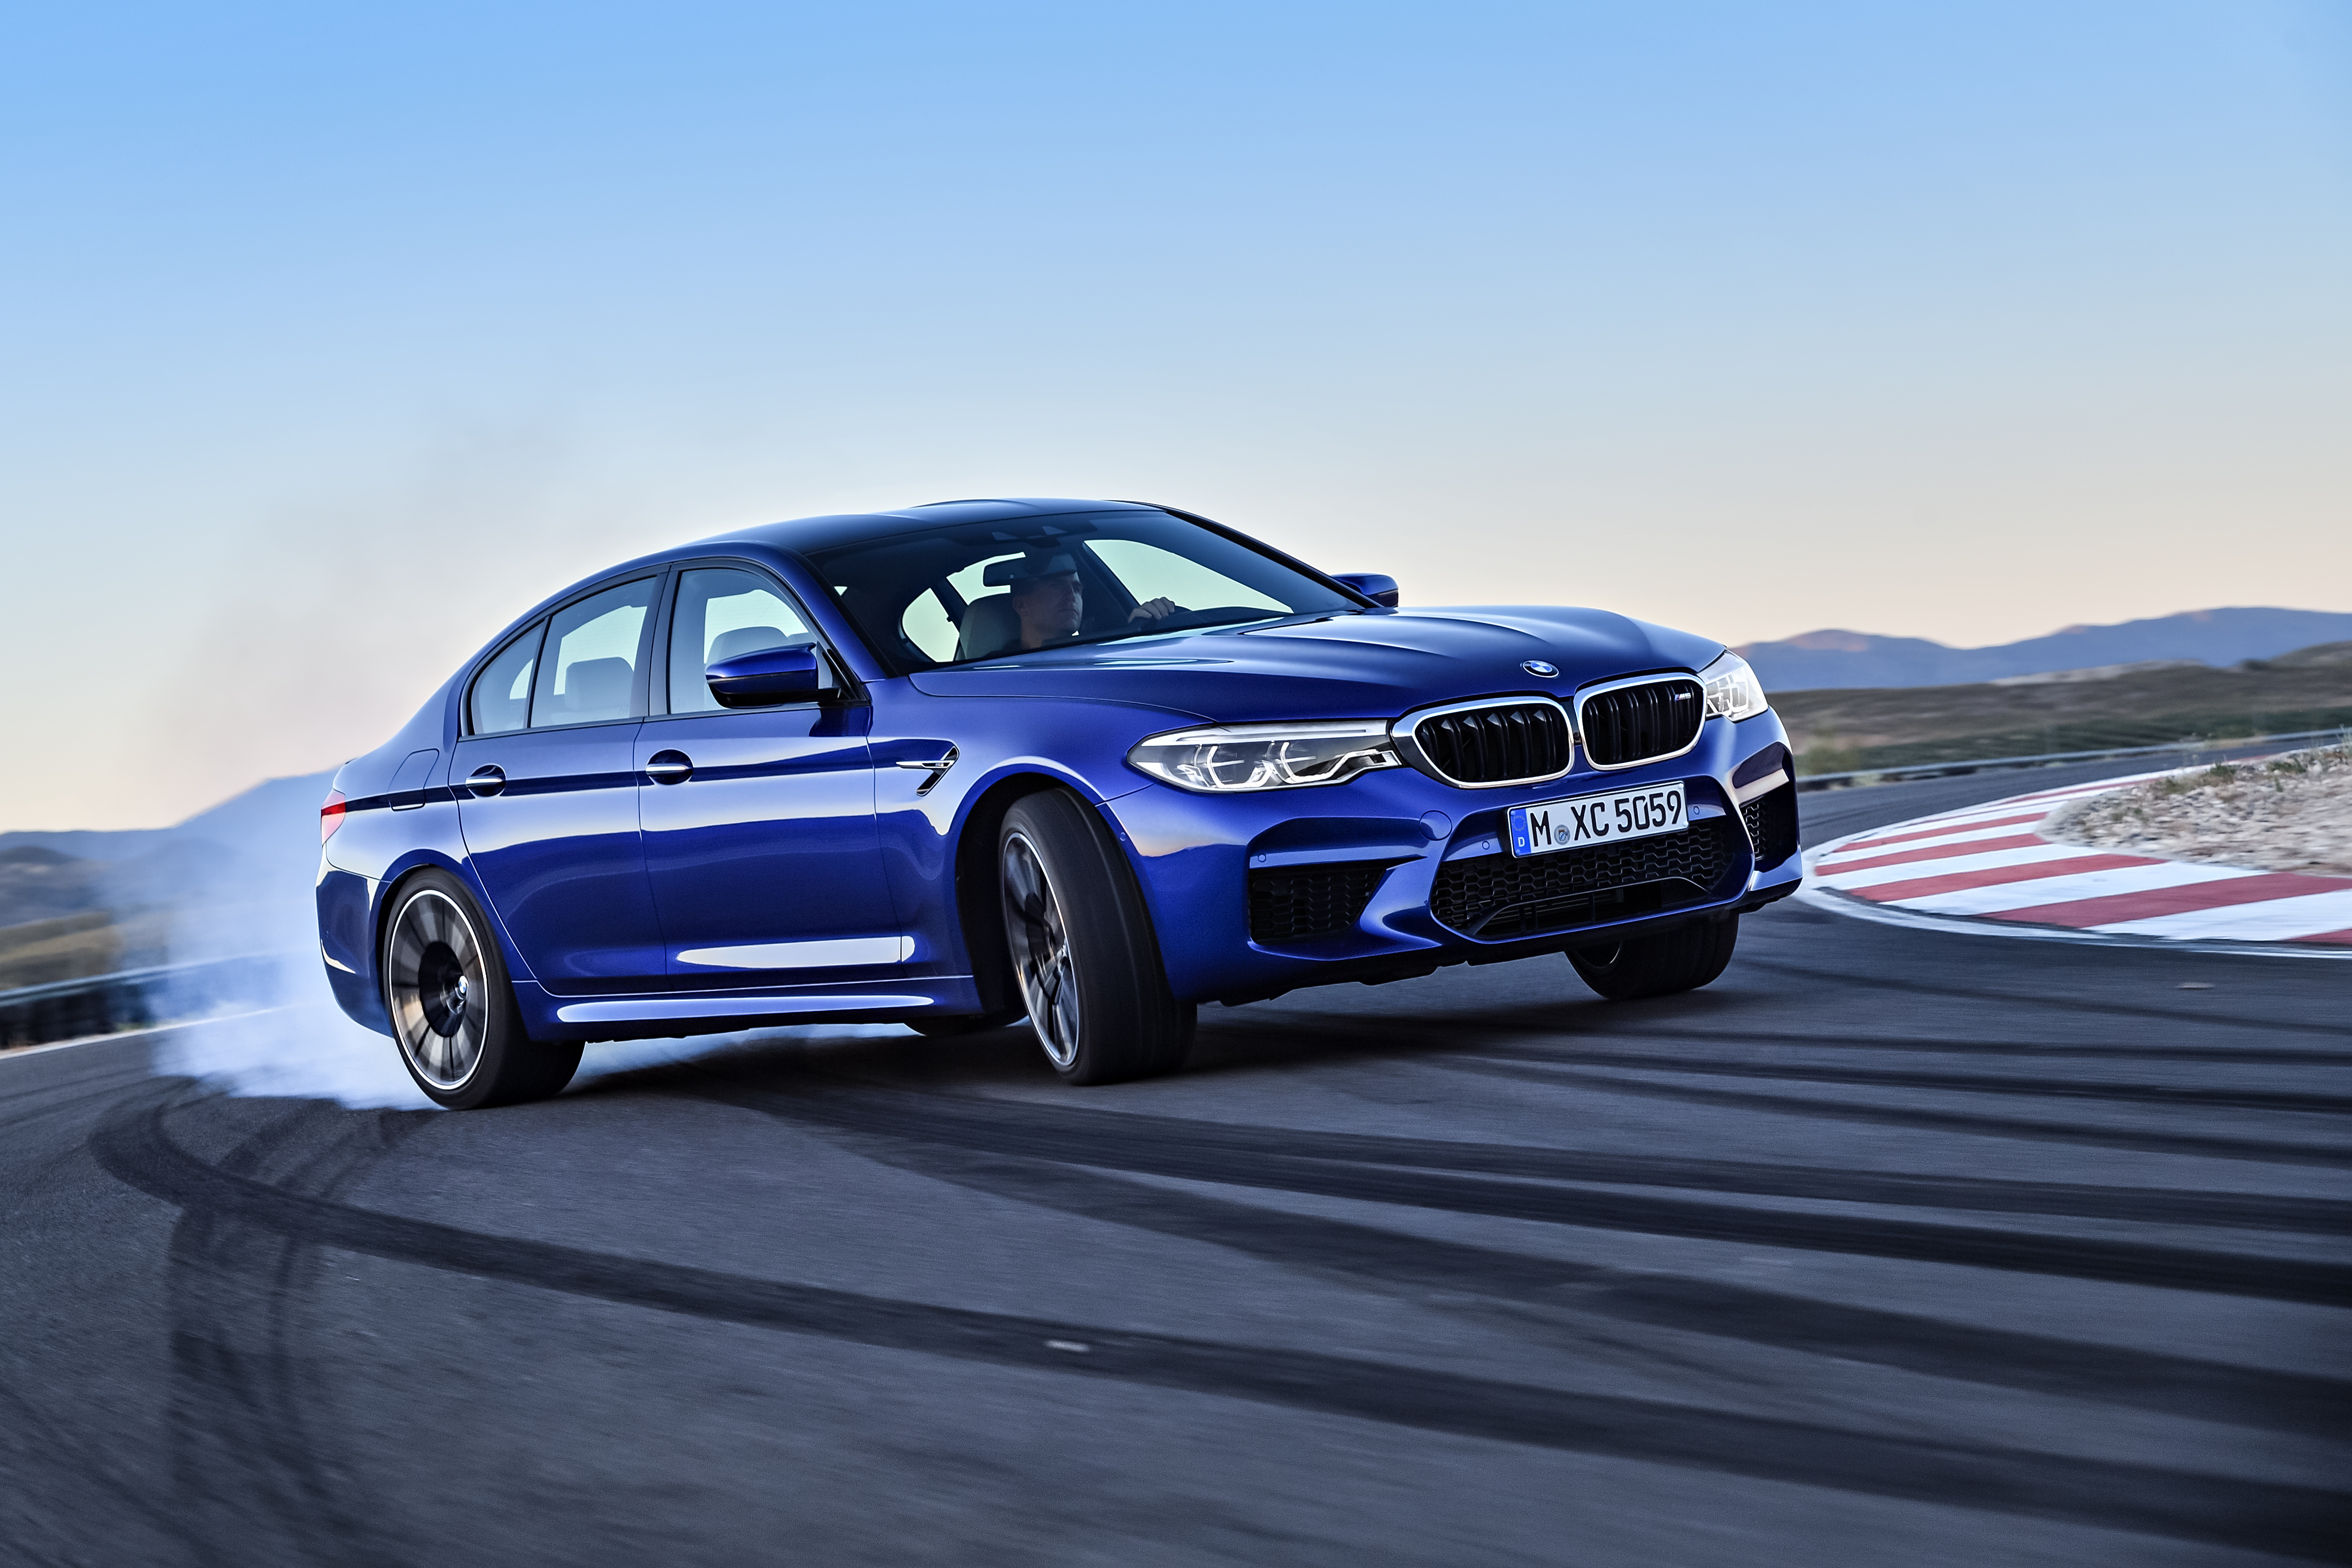 New M Performance Parts For Updated M5 - BimmerLife